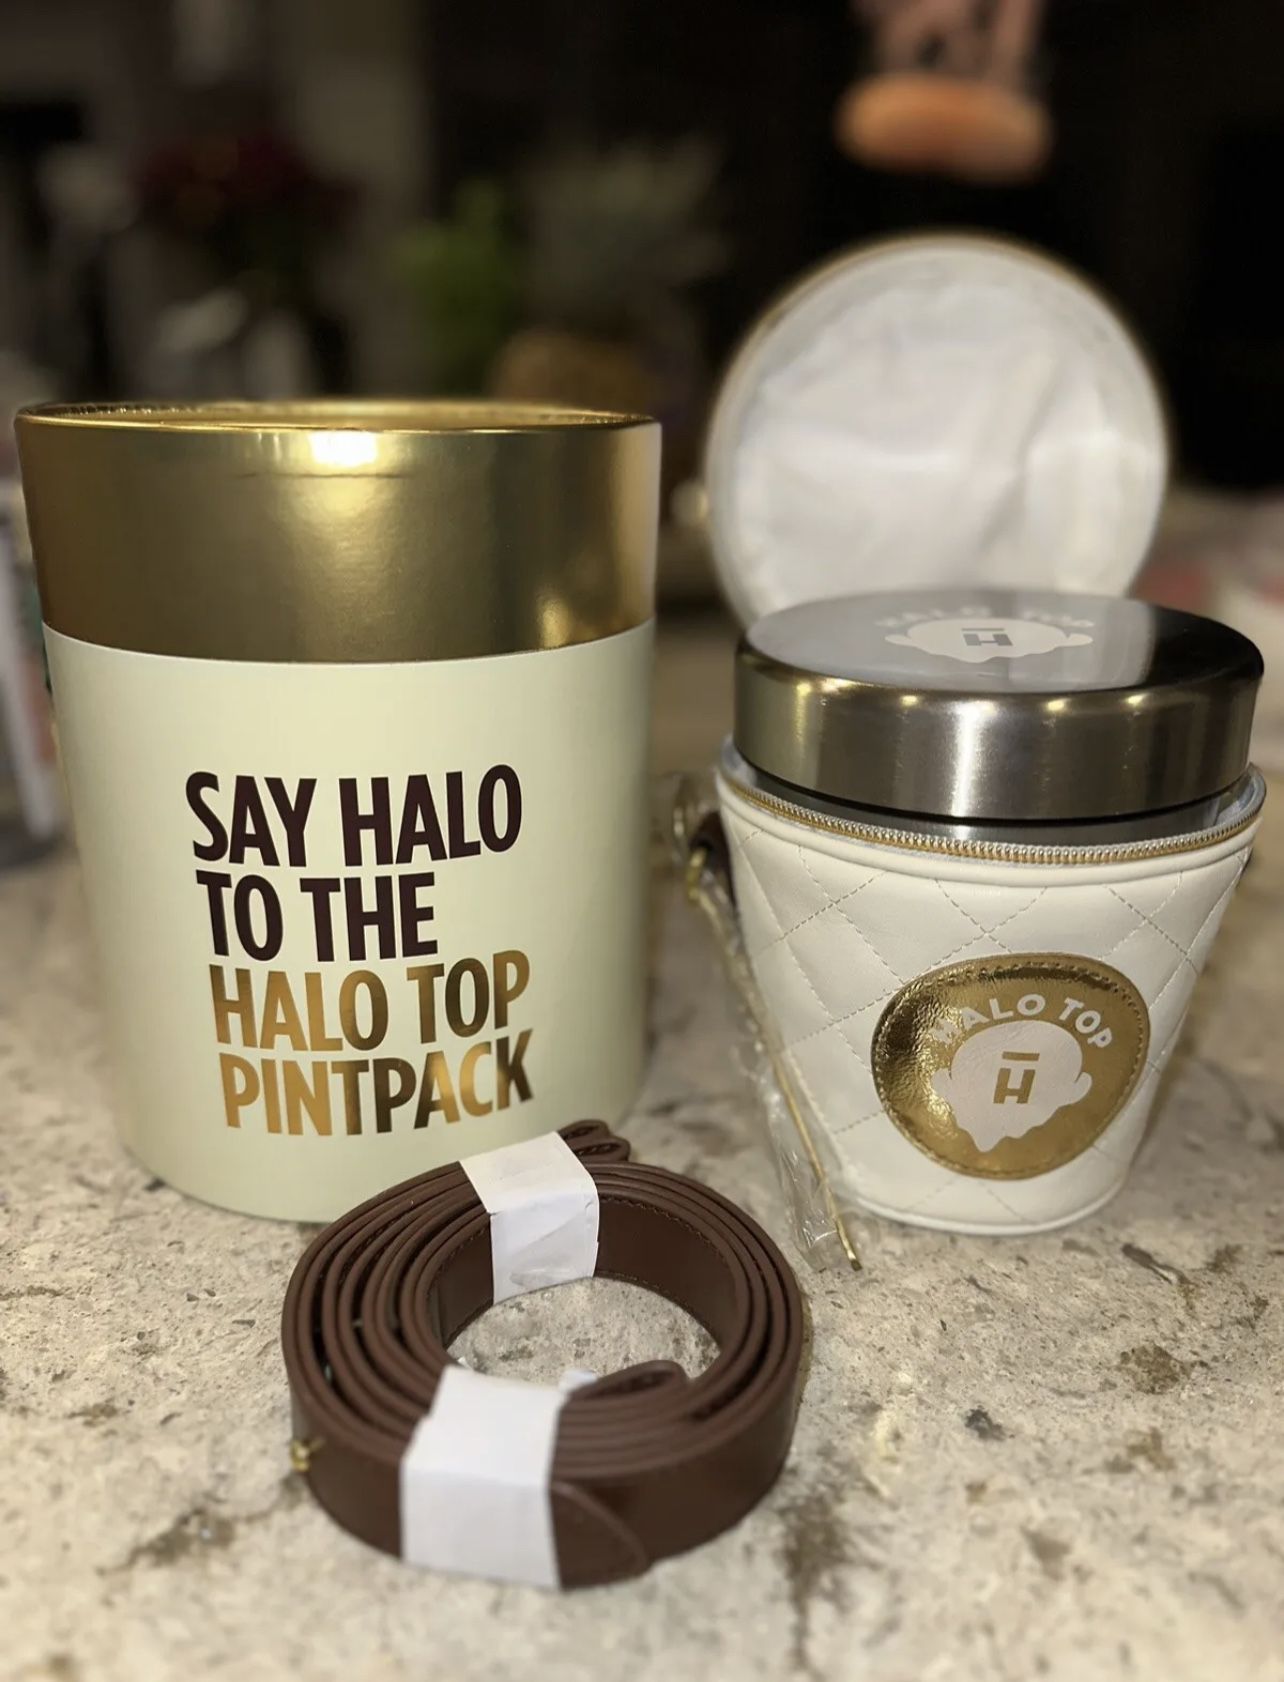 Halo Top PintPack Crossbody Ice Cream Bag w/ Gold plated Stainless Steel Spoon!